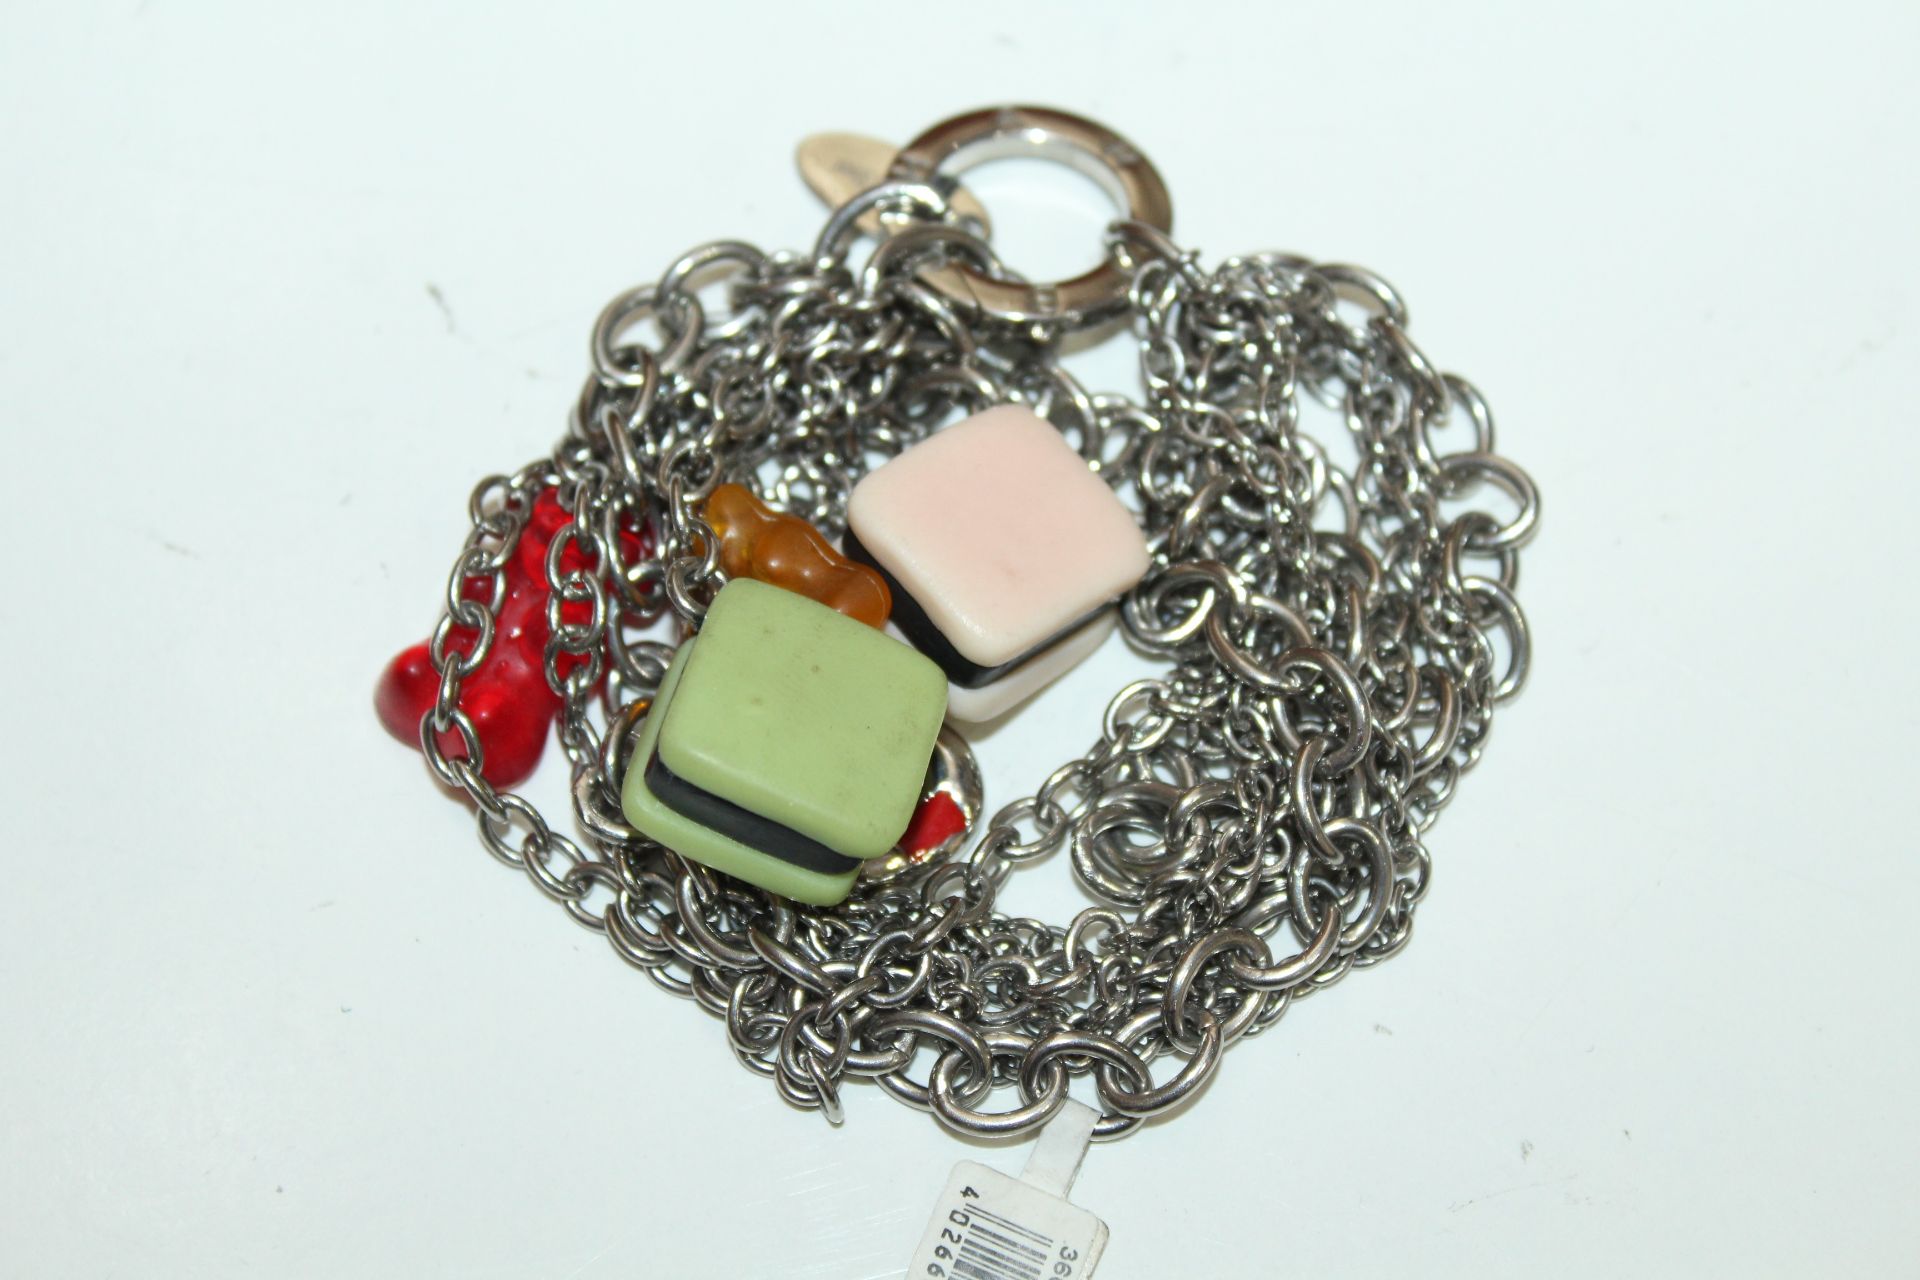 1 x HARIBO BRACELET RRP £130 *PLEASE NOTE THAT THE BID PRICE IS MULTIPLIED BY THE NUMBER OF ITEMS IN